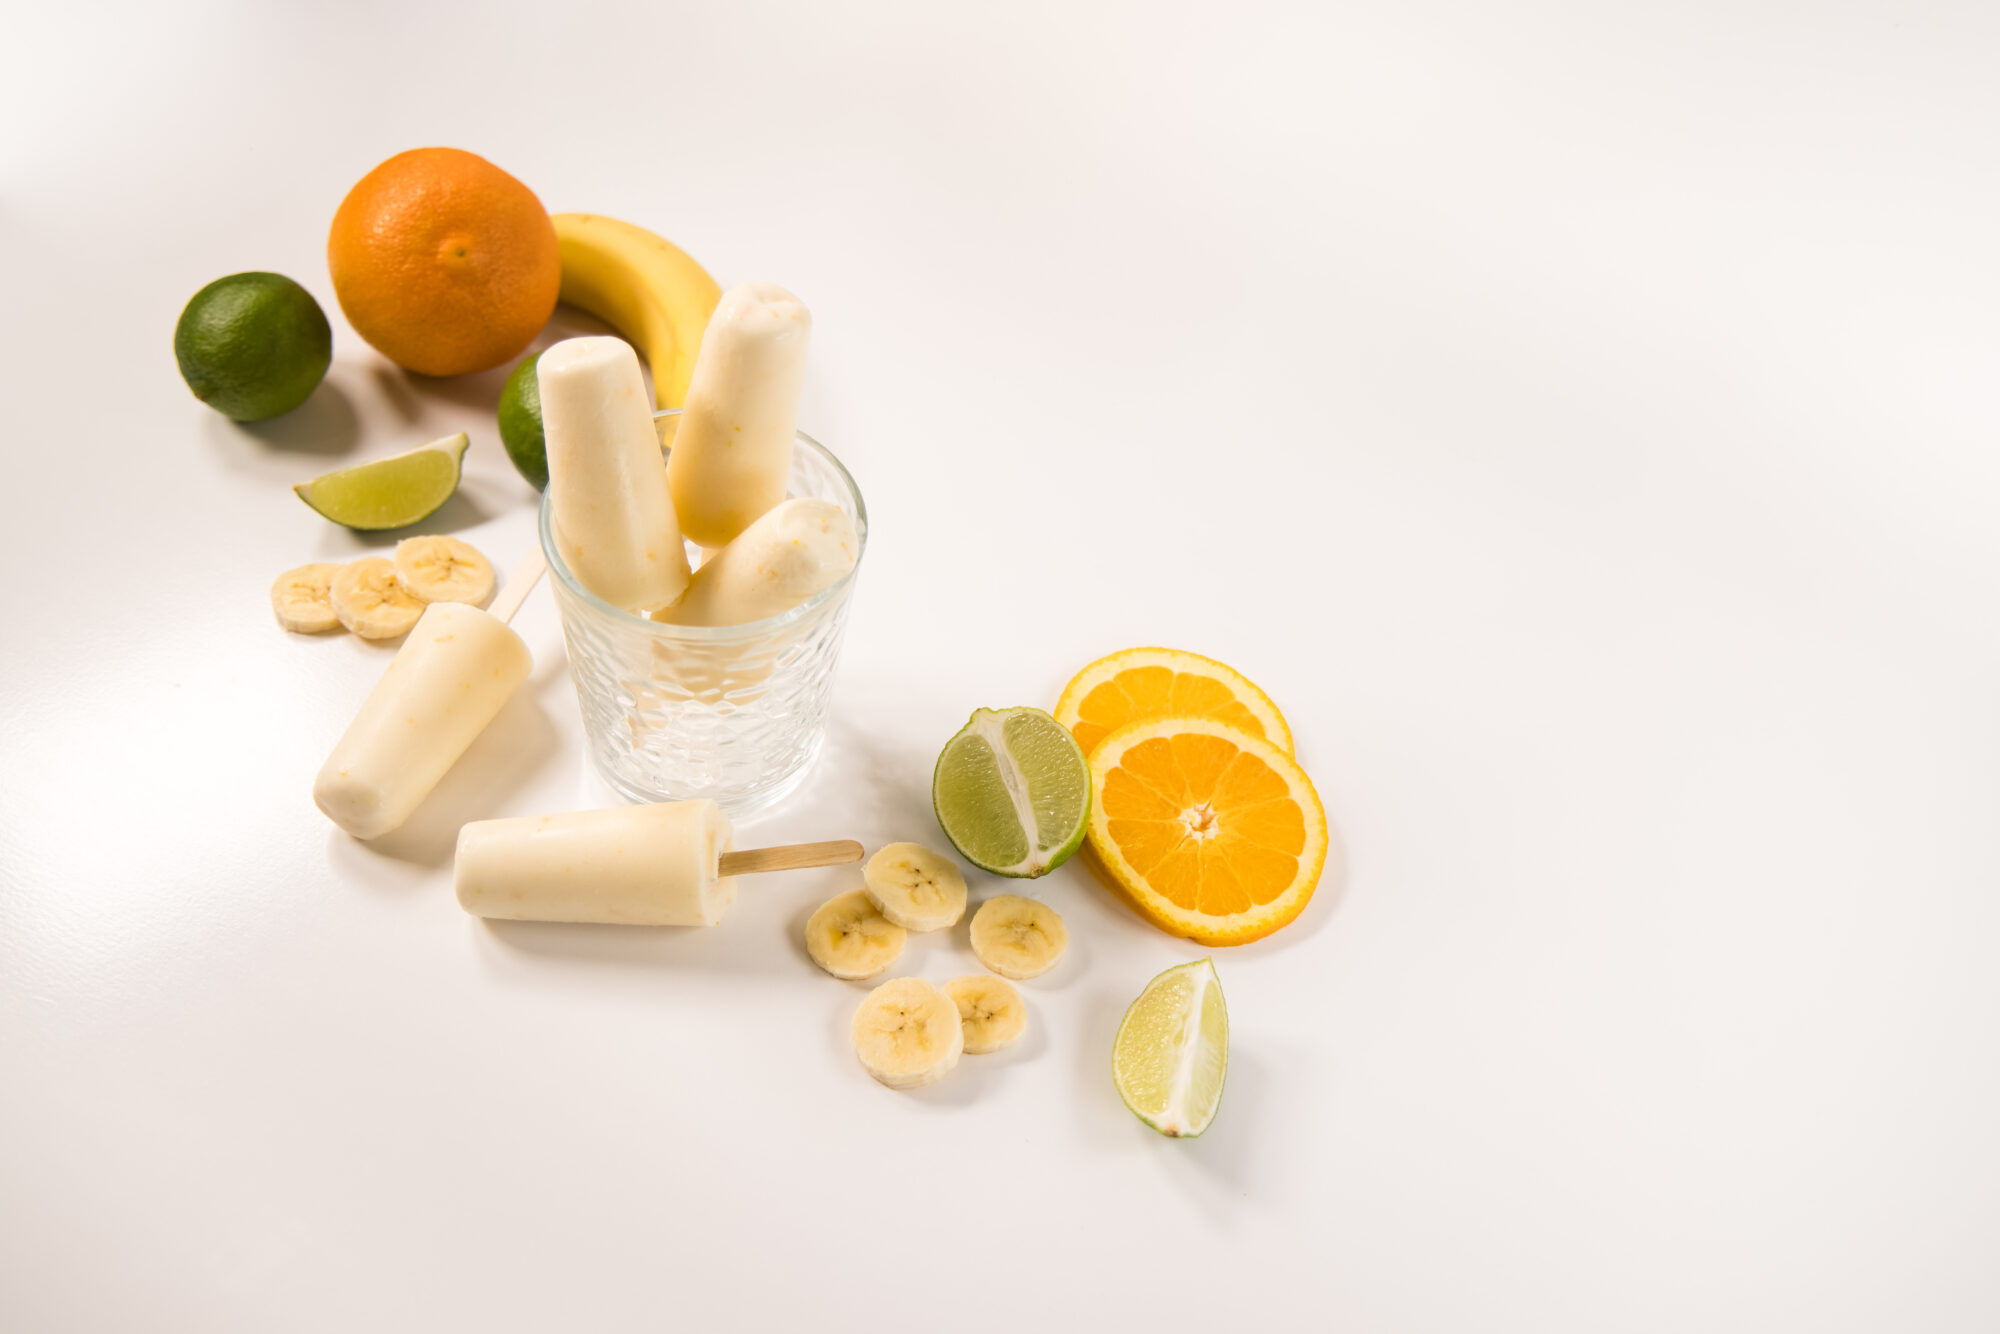 Three Banana Daquiri popsicles in a glass jar with two more laying to the side. Slices of bananas, oranges and limes surround the jar.